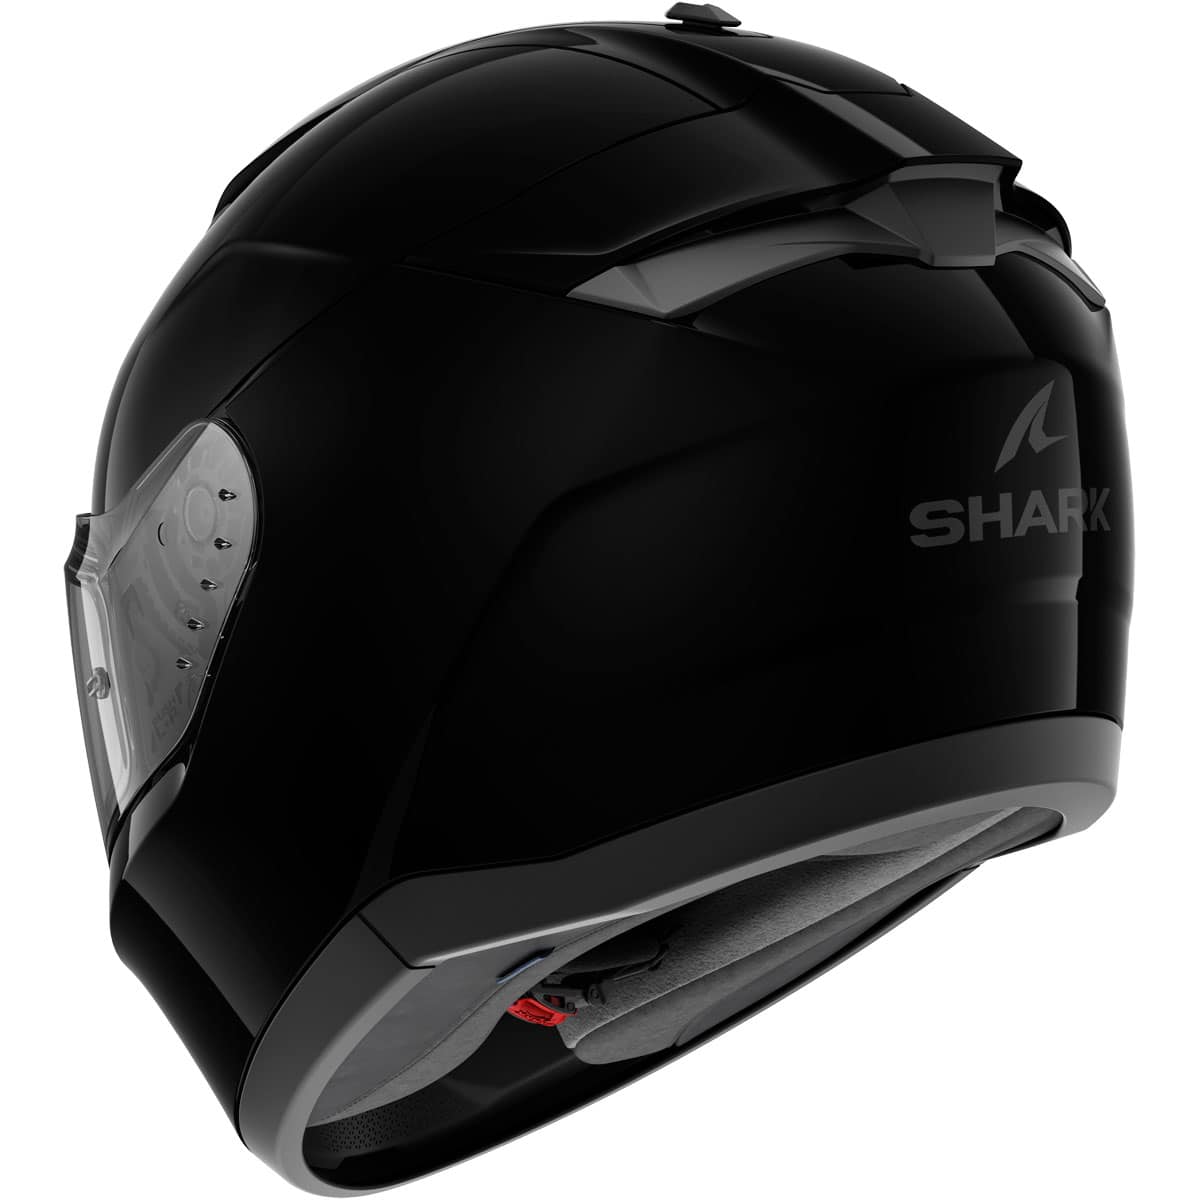 The Shark Ridill helmet is in it's 2nd rework. Featuring an all-new design and exceptional features, the Shark Ridill 2 showcases a streetwear look with air inlets and an effective rear spoiler